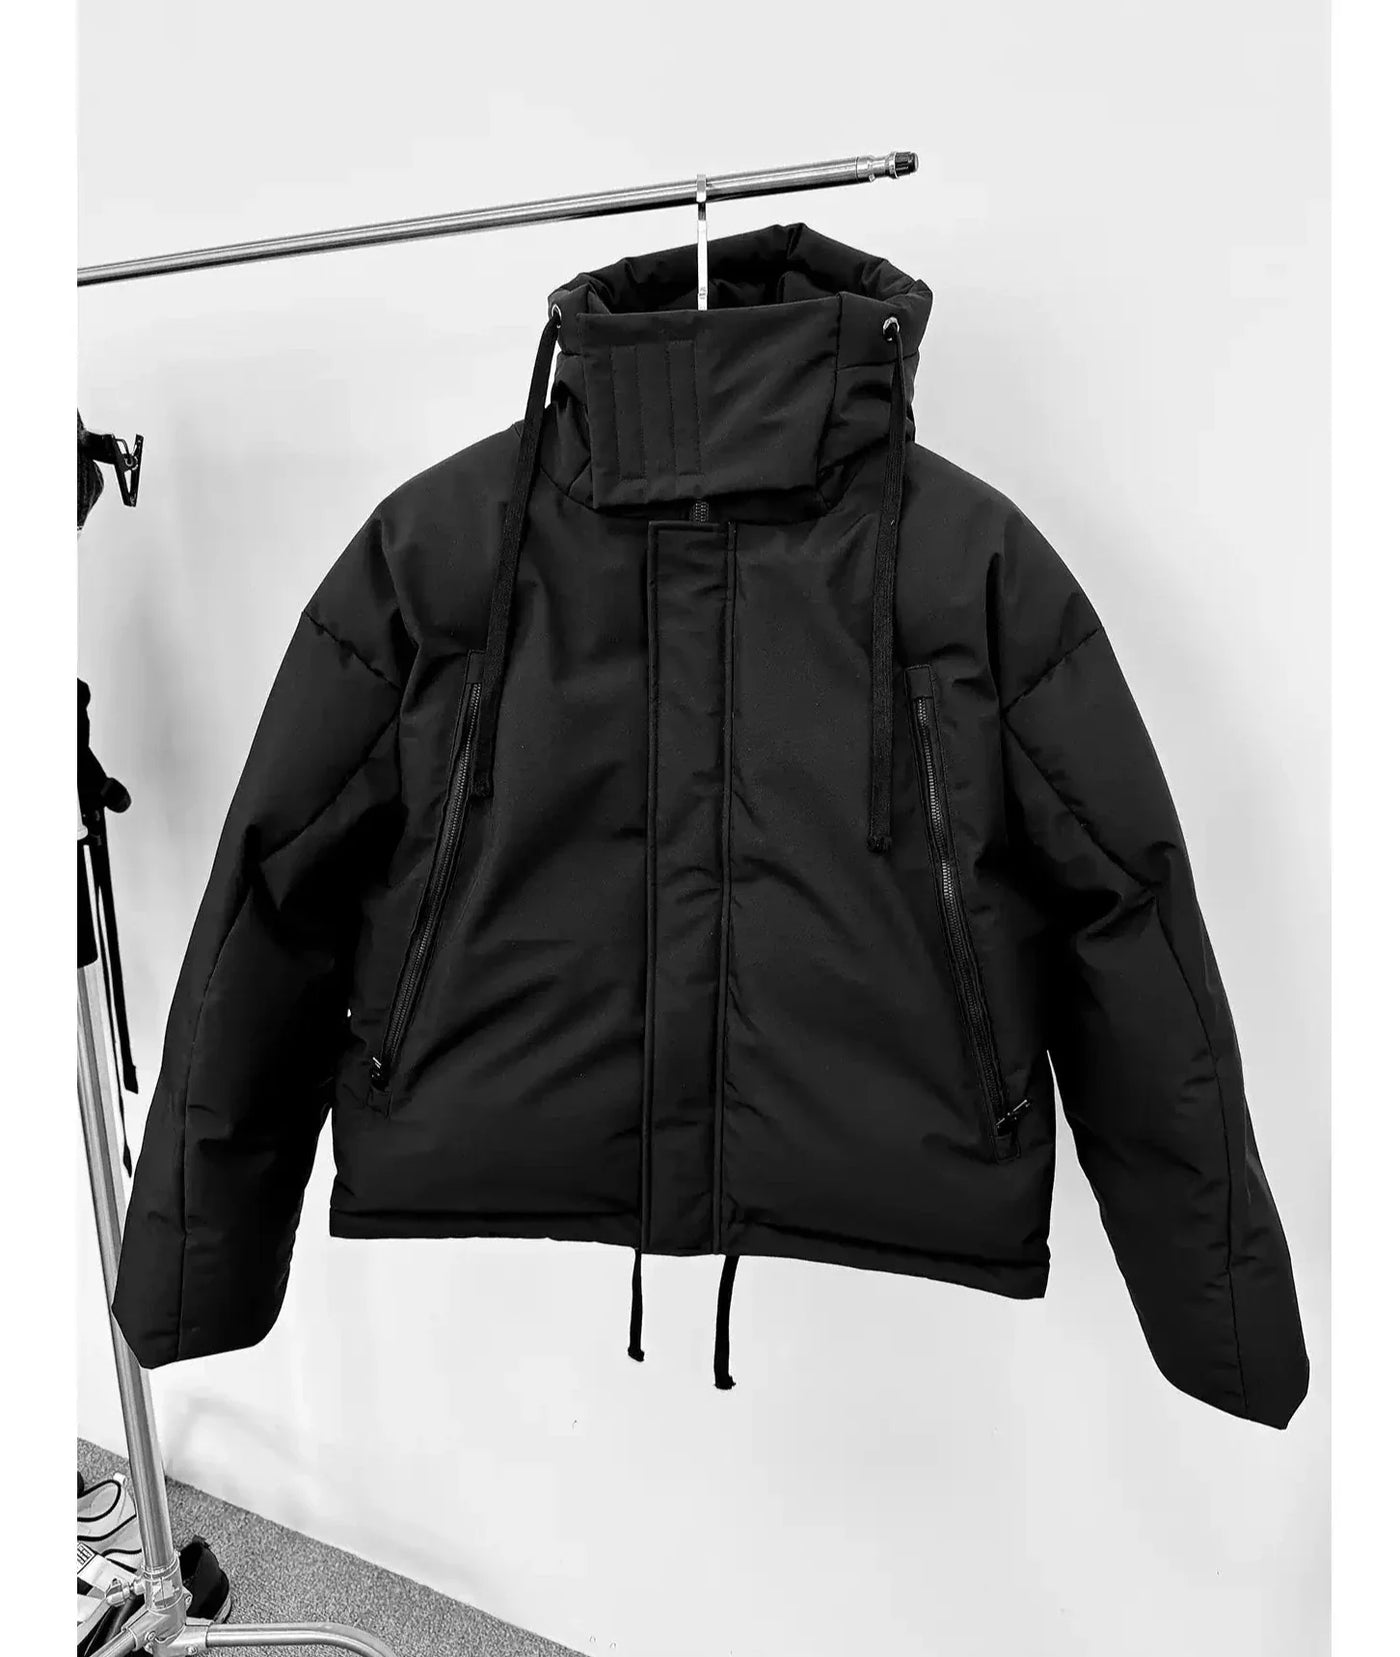 Multi-Zip and Strings Puffer Jacket Korean Street Fashion Jacket By Terra Incognita Shop Online at OH Vault